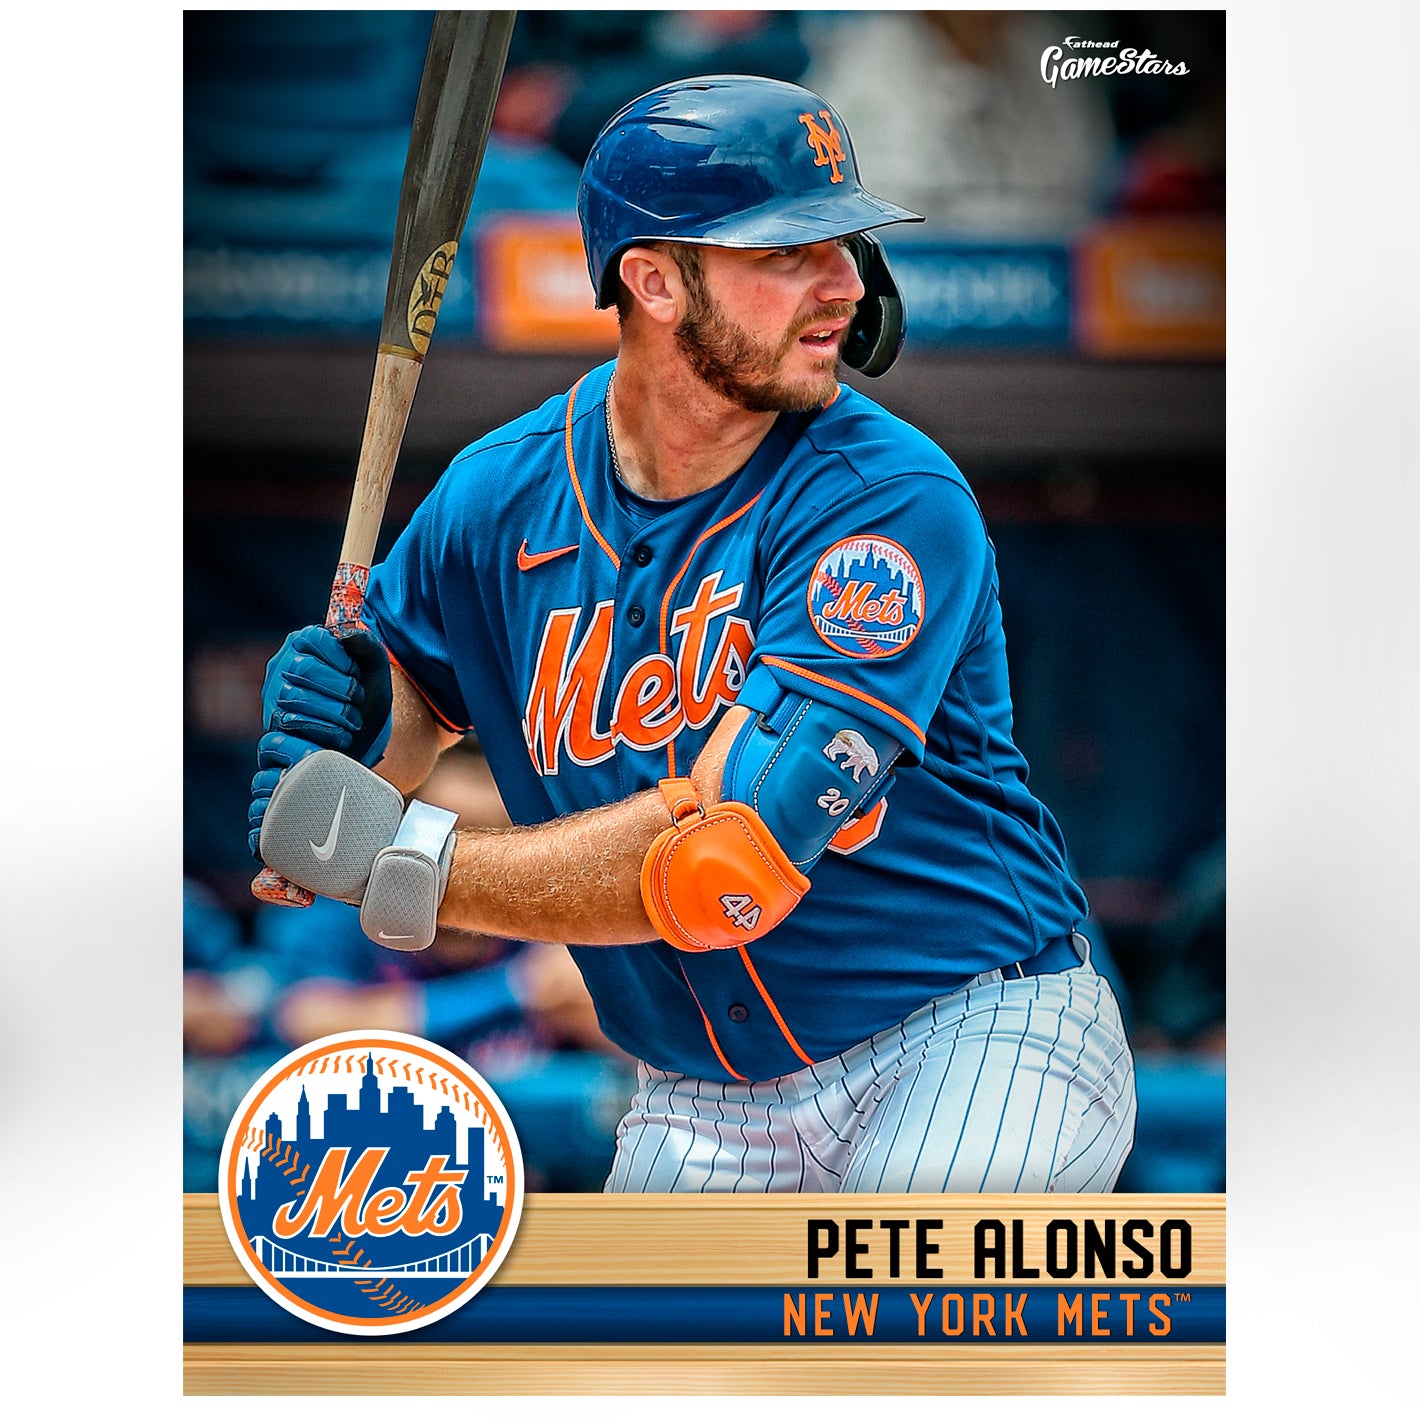 New York Mets: Pete Alonso 2021 GameStar - Officially Licensed MLB Rem